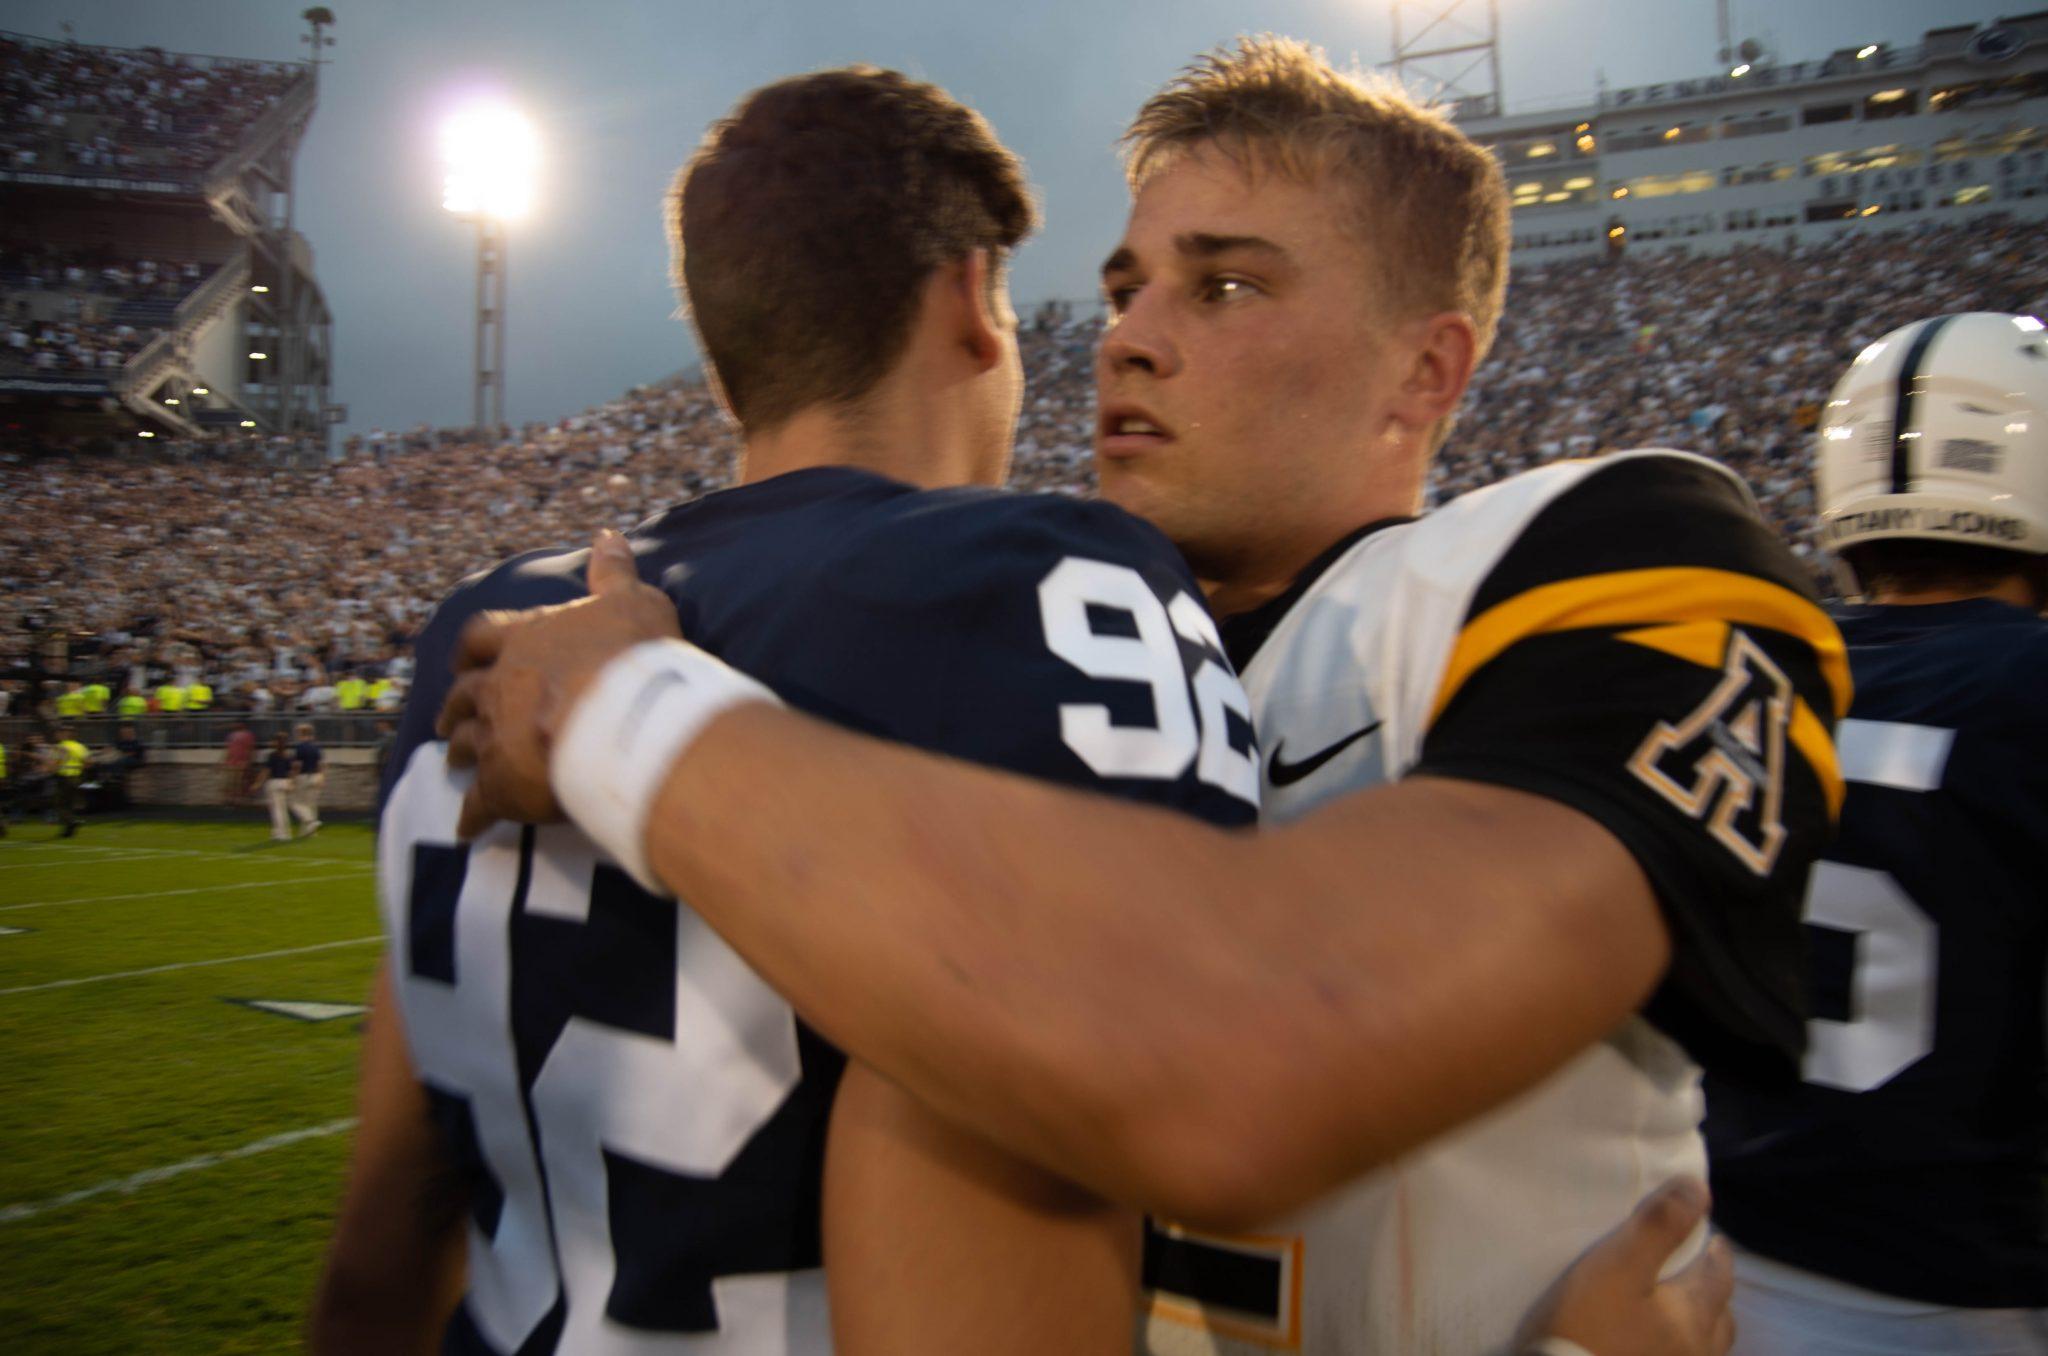 Redshirt+sophomore+quarterback+Zac+Thomas+embraces+a+Penn+State+player+following+their+loss+to+the+Nittany+Lions+on+Saturday.